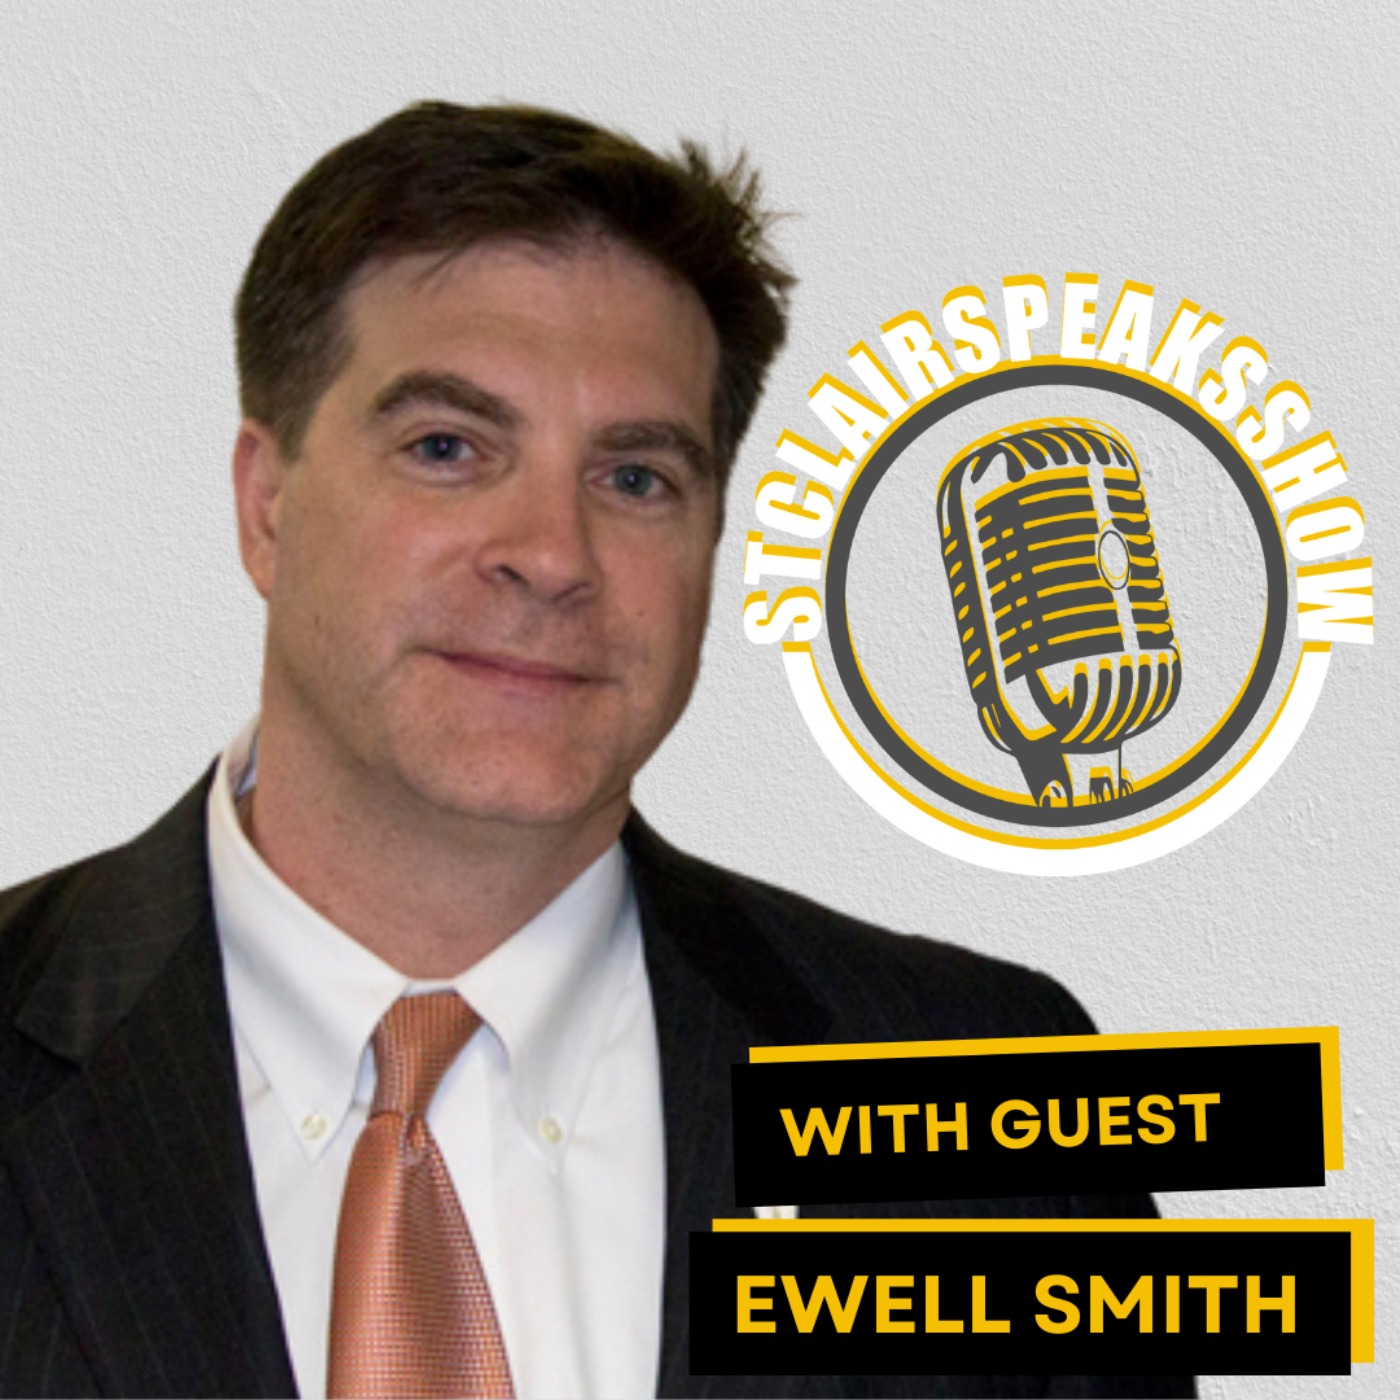 The StclairSpeaksShow Podcast with Ewell Smith - It's Bloggable! : Your Voice Will Impact Lives Image